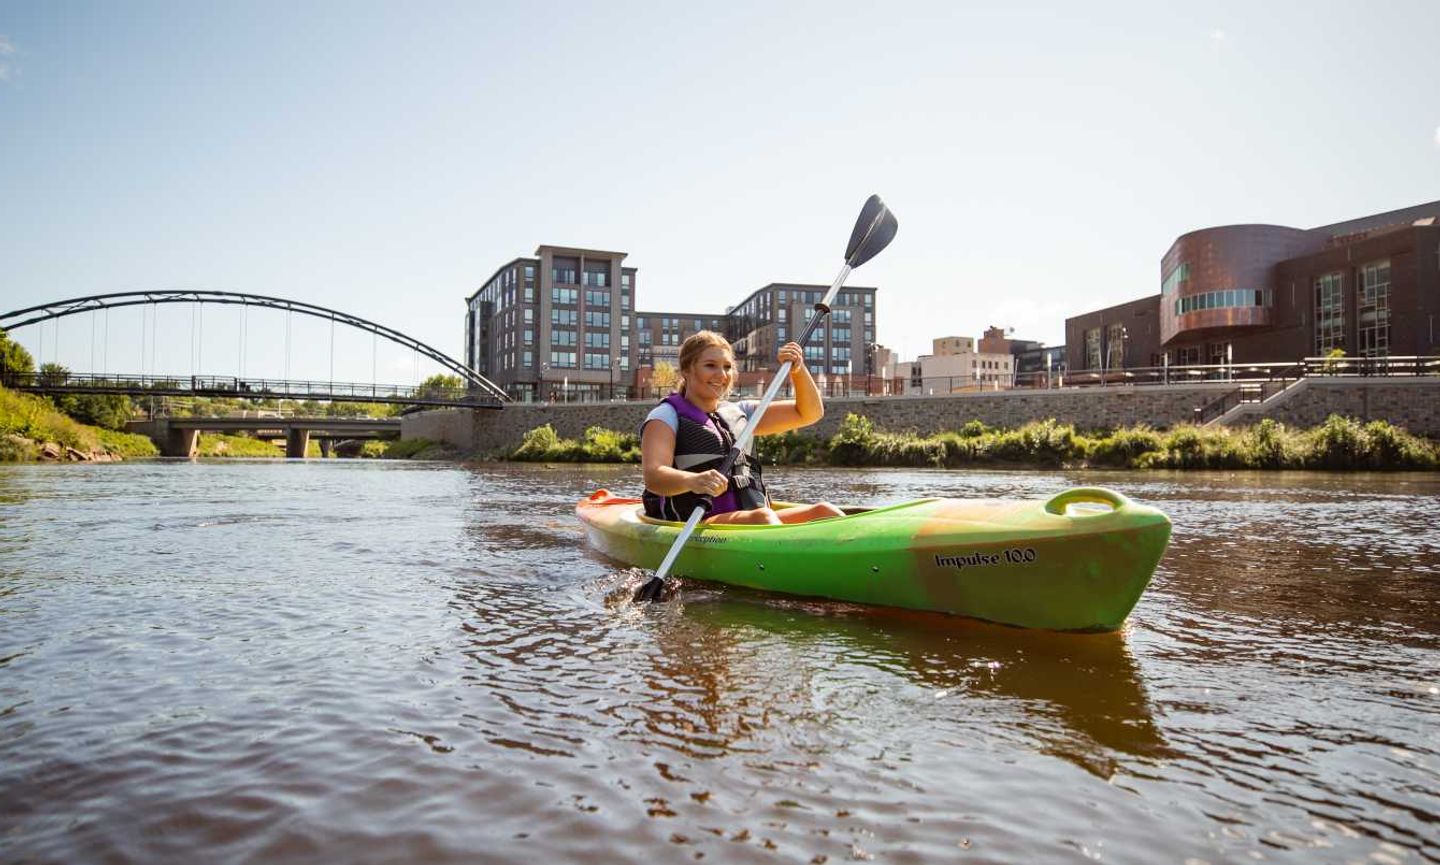 Eau Claire wouldn’t be the city it is without the draw of the great outdoors.